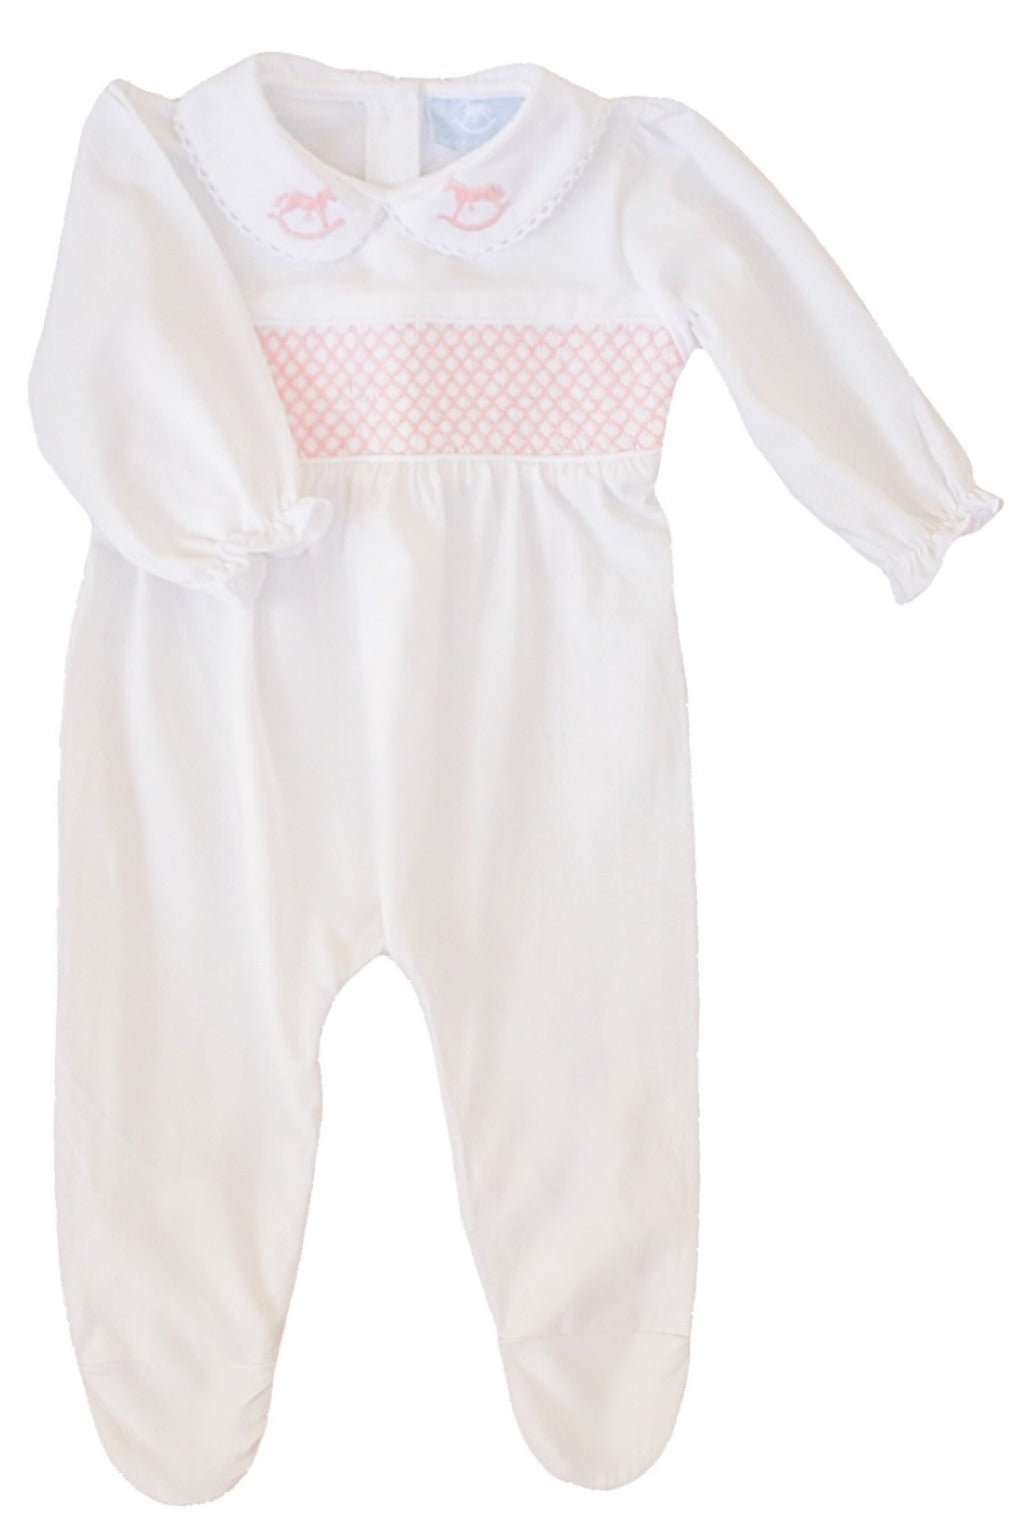 The Layette Smocked Babygrow - Classic Pink